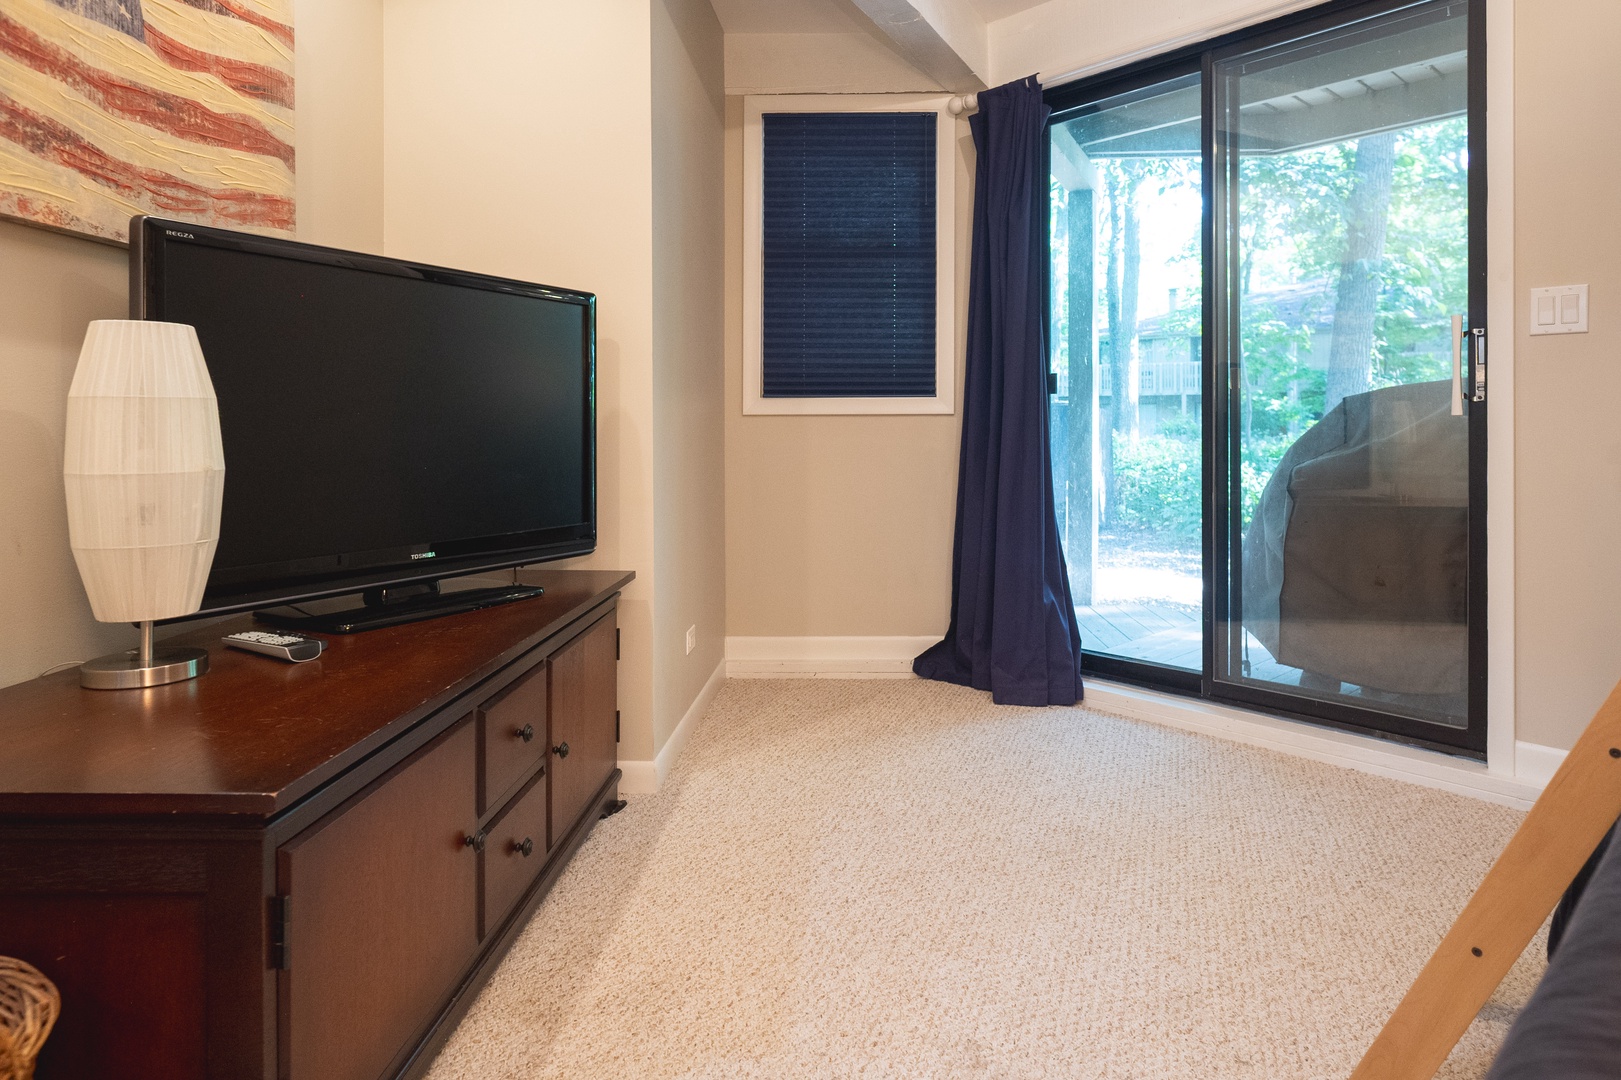 The second bedroom offers a twin-over-full bunkbed, twin trundle, Smart TV, & deck access